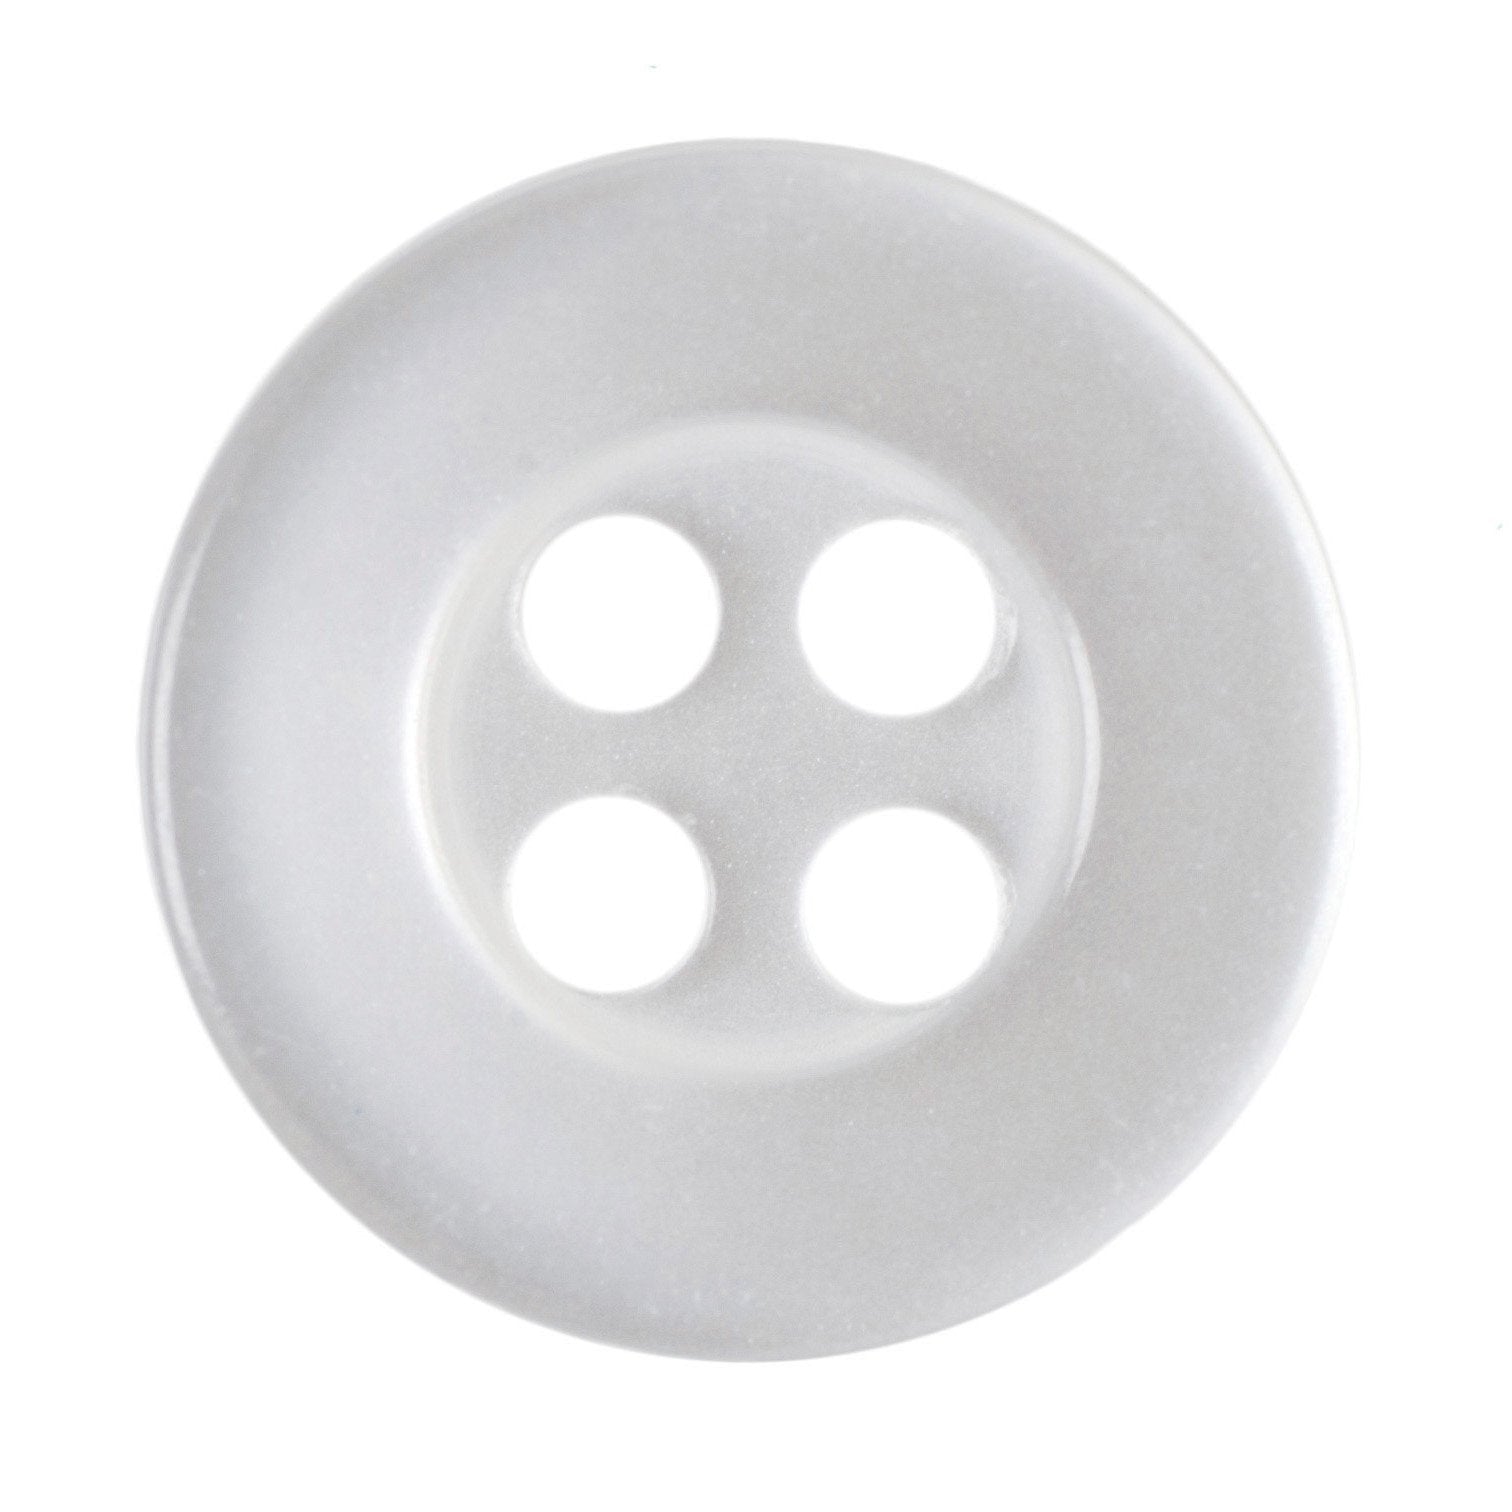 Shirt Buttons White from Jaycotts Sewing Supplies